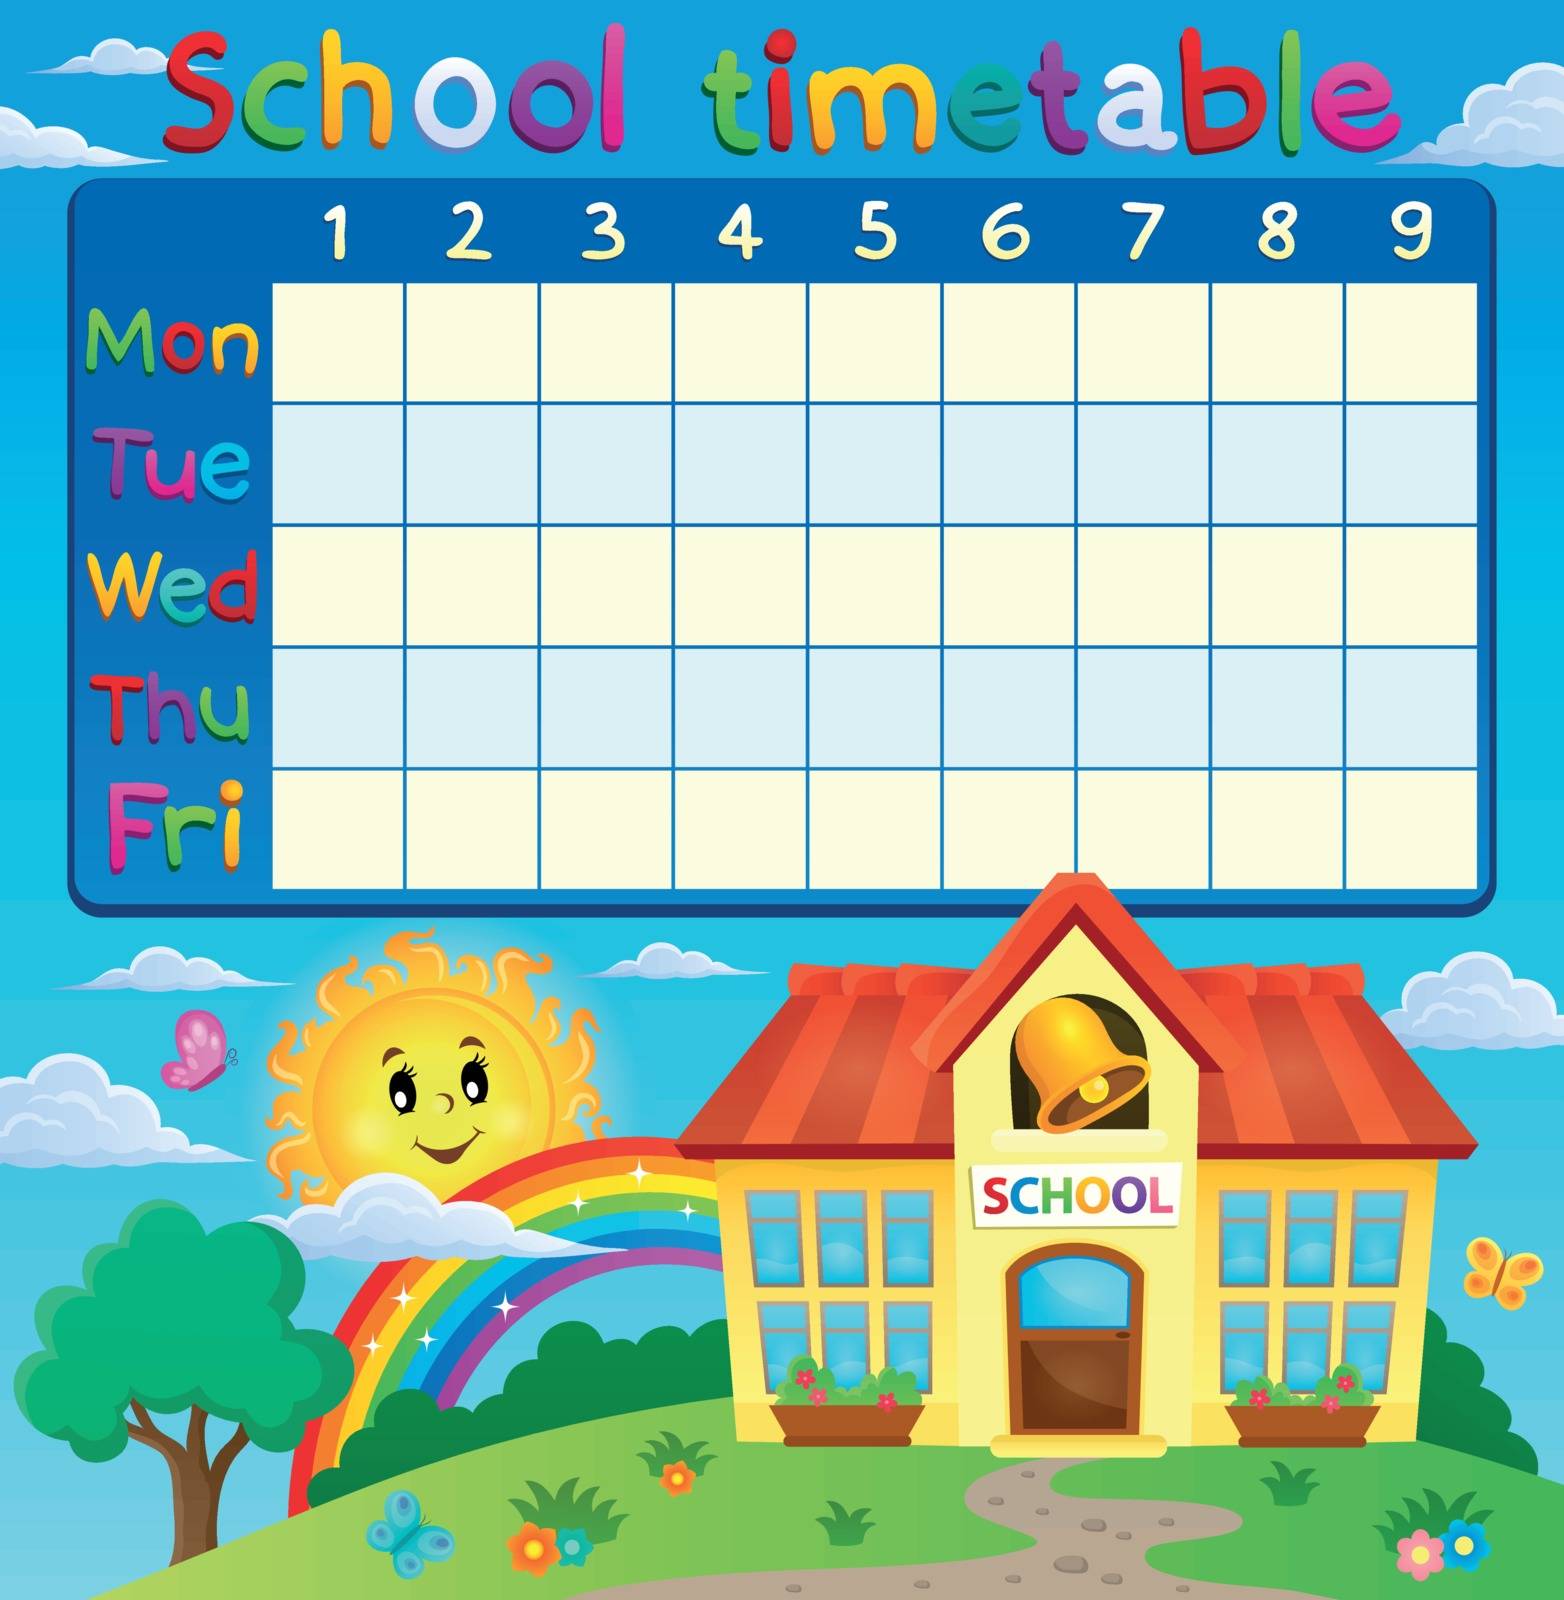 School timetable with school building by clairev